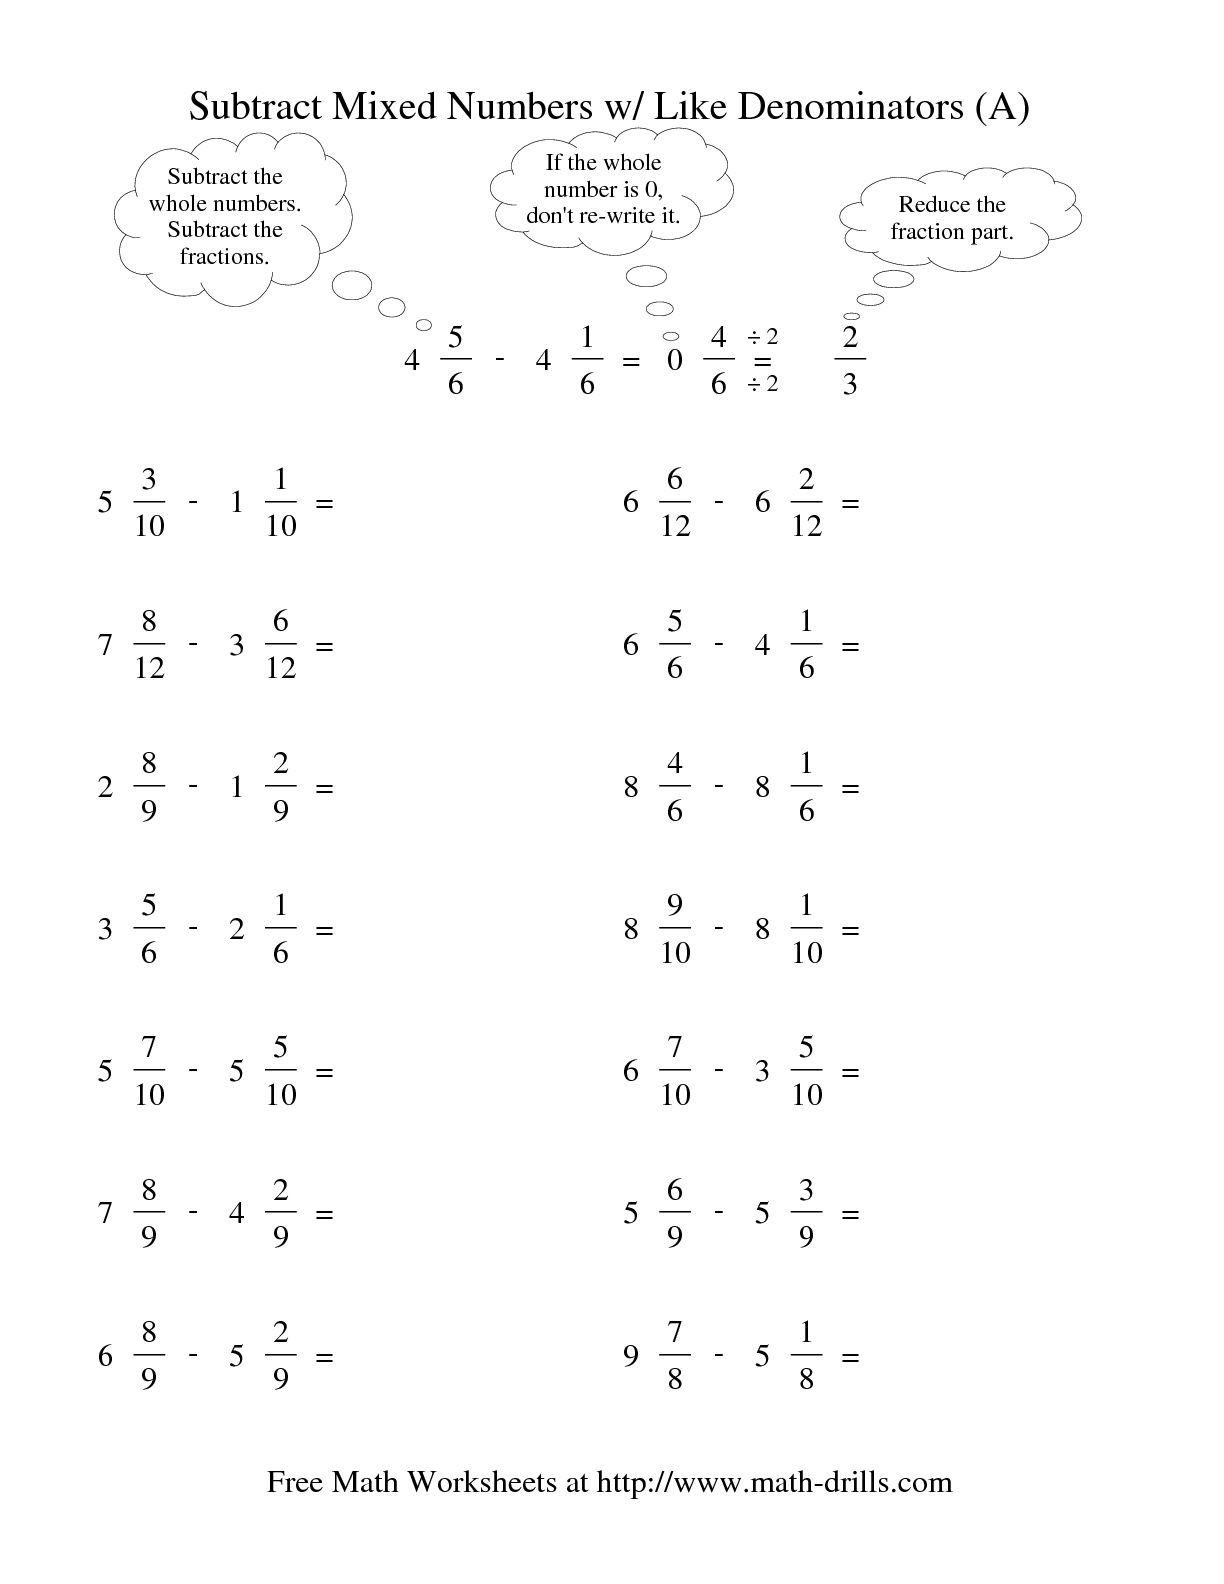 subtracting-mixed-numbers-worksheets-printable-word-searches